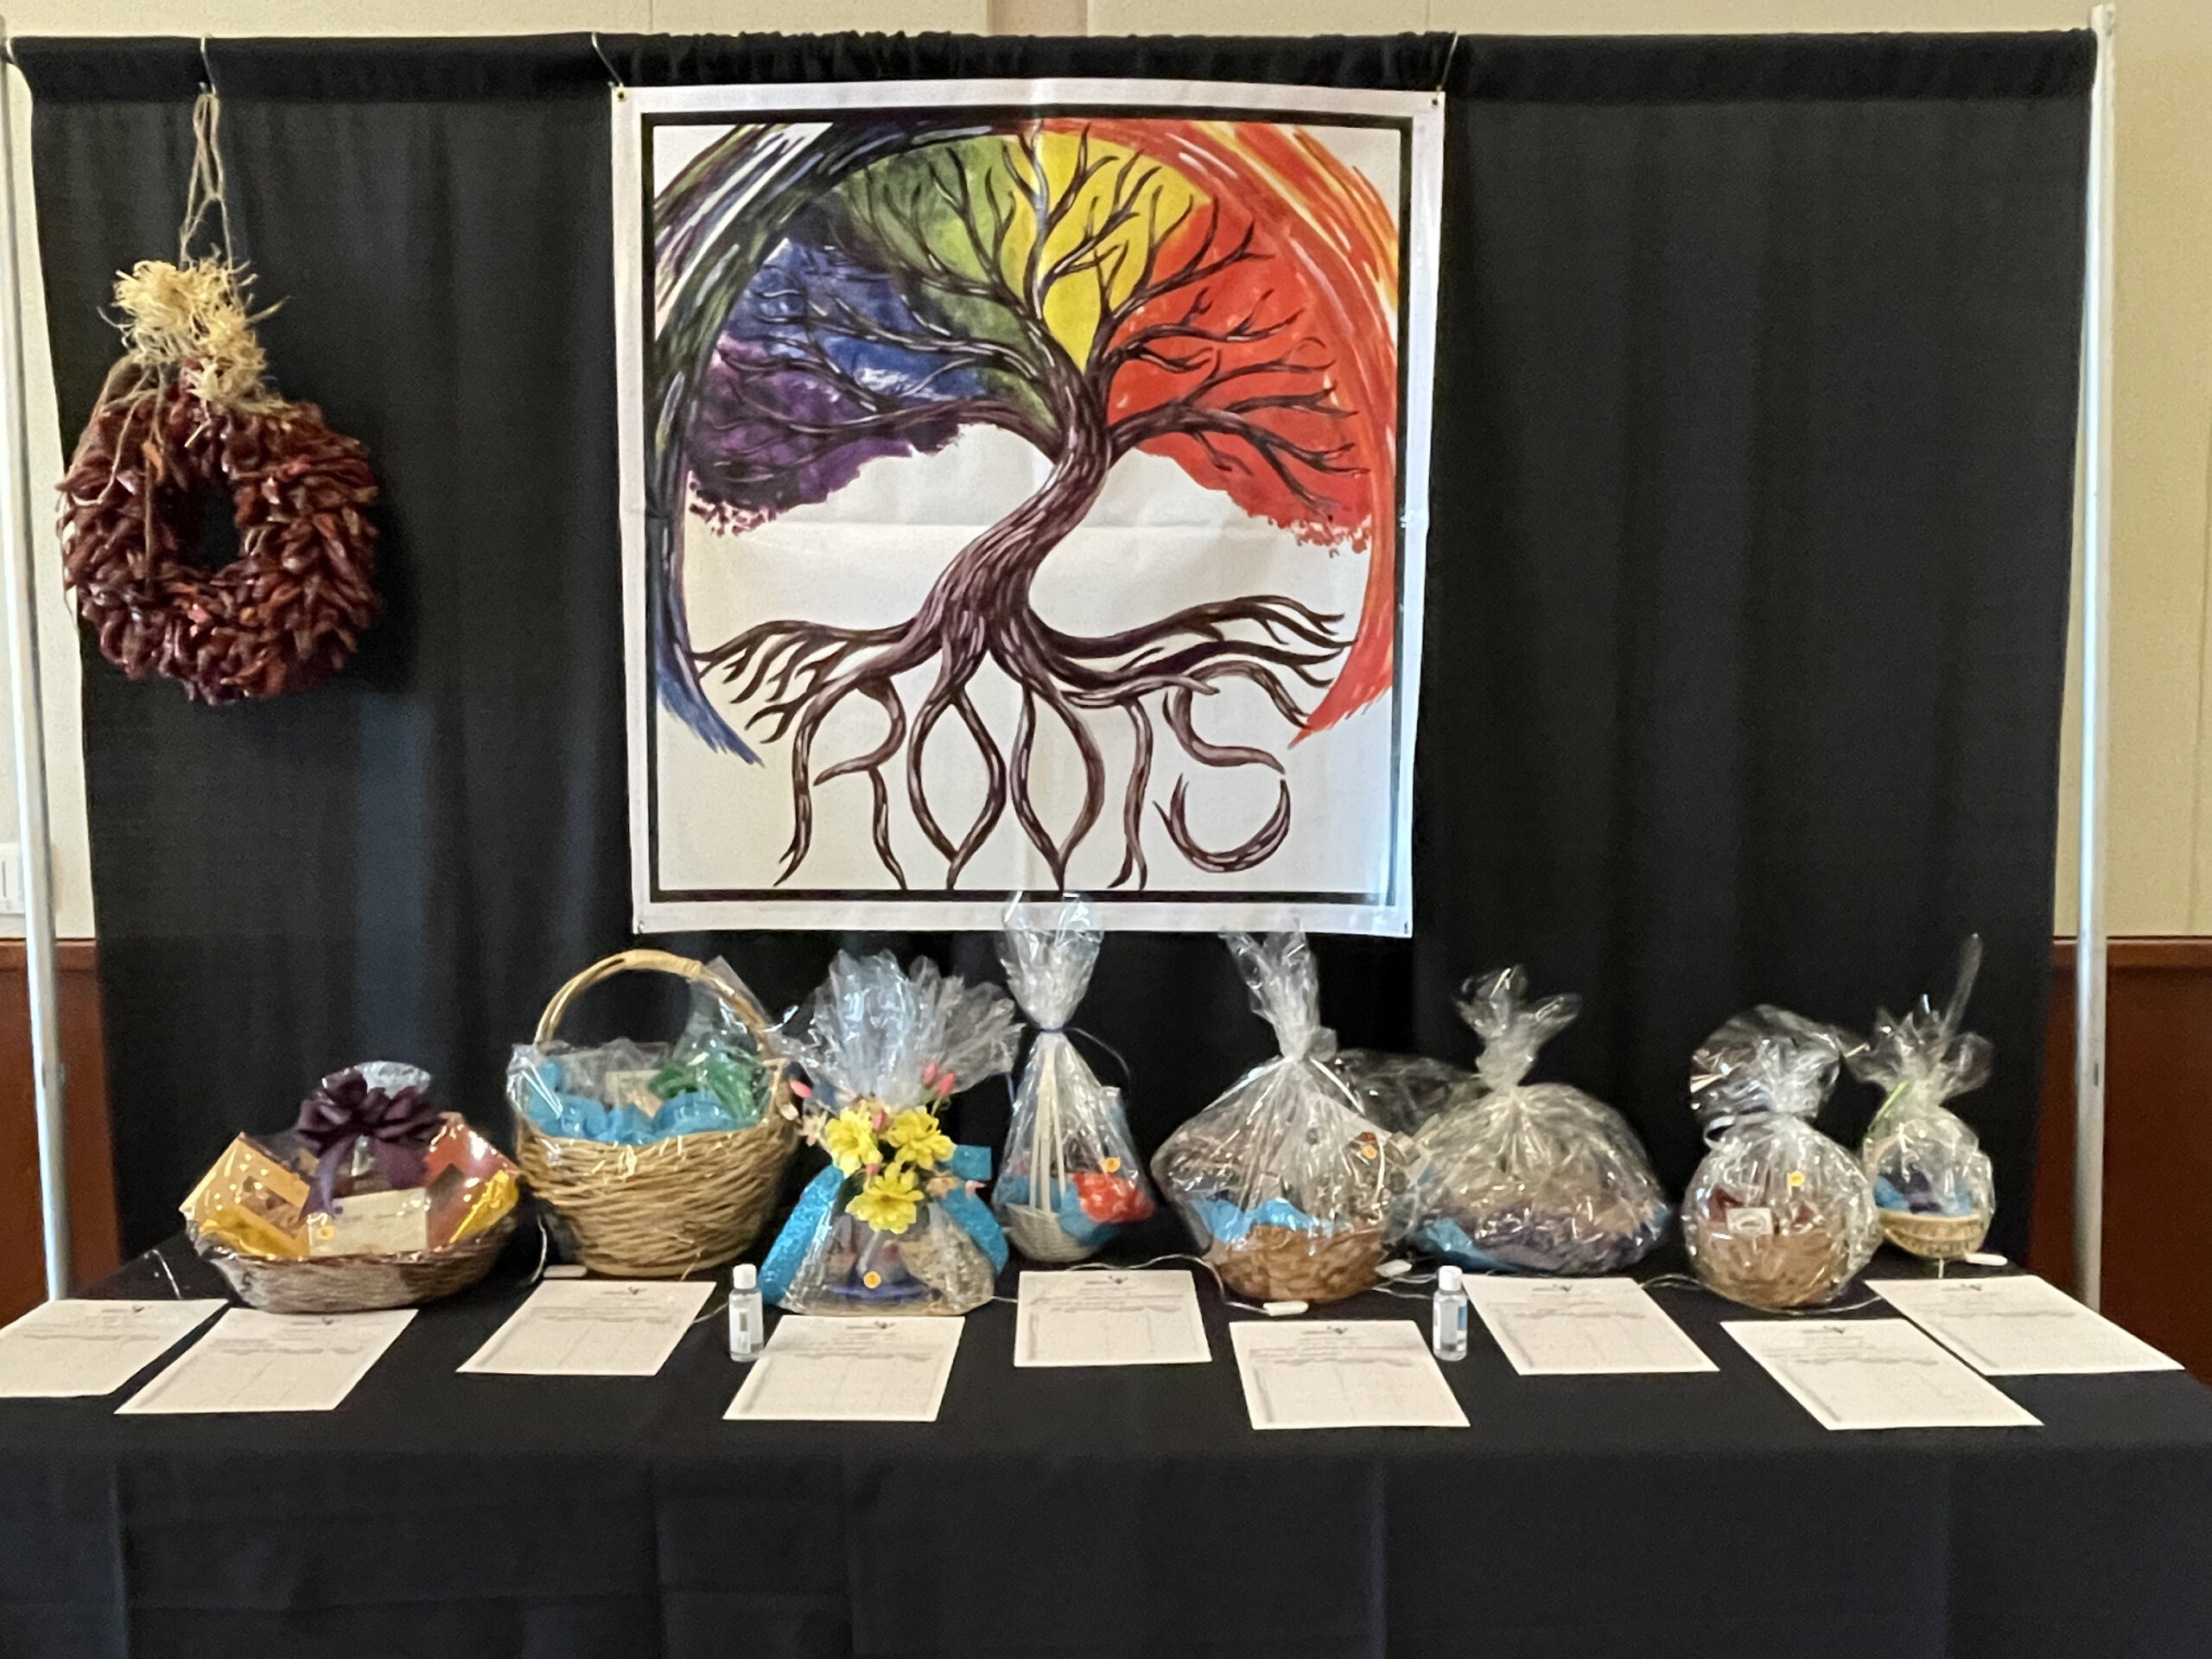 Silent auction baskets sit on a table in front of Roots banner, one of CFI's banner sponsors for the 40th Celebration event at CMU ballroom.